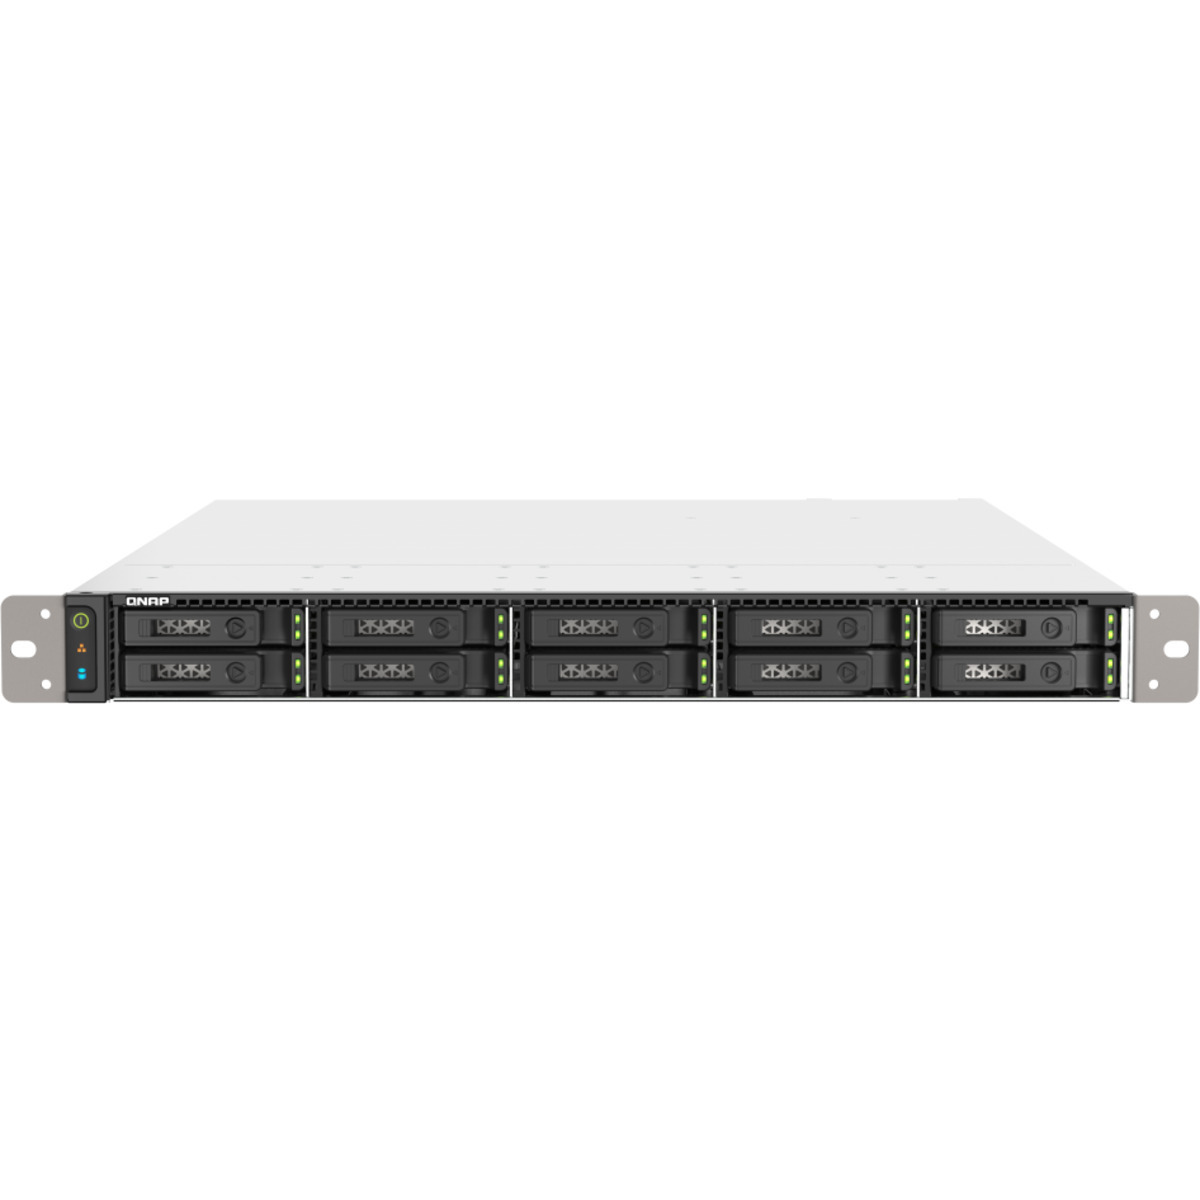 QNAP TS-h1090FU-7232P 14tb 10-Bay RackMount Large Business / Enterprise NAS - Network Attached Storage Device 7x2tb Western Digital Red SN700 WDS200T1R0C  3400/2900MB/s M.2 2280 NVMe SSD NAS Class Drives Installed - Burn-In Tested TS-h1090FU-7232P